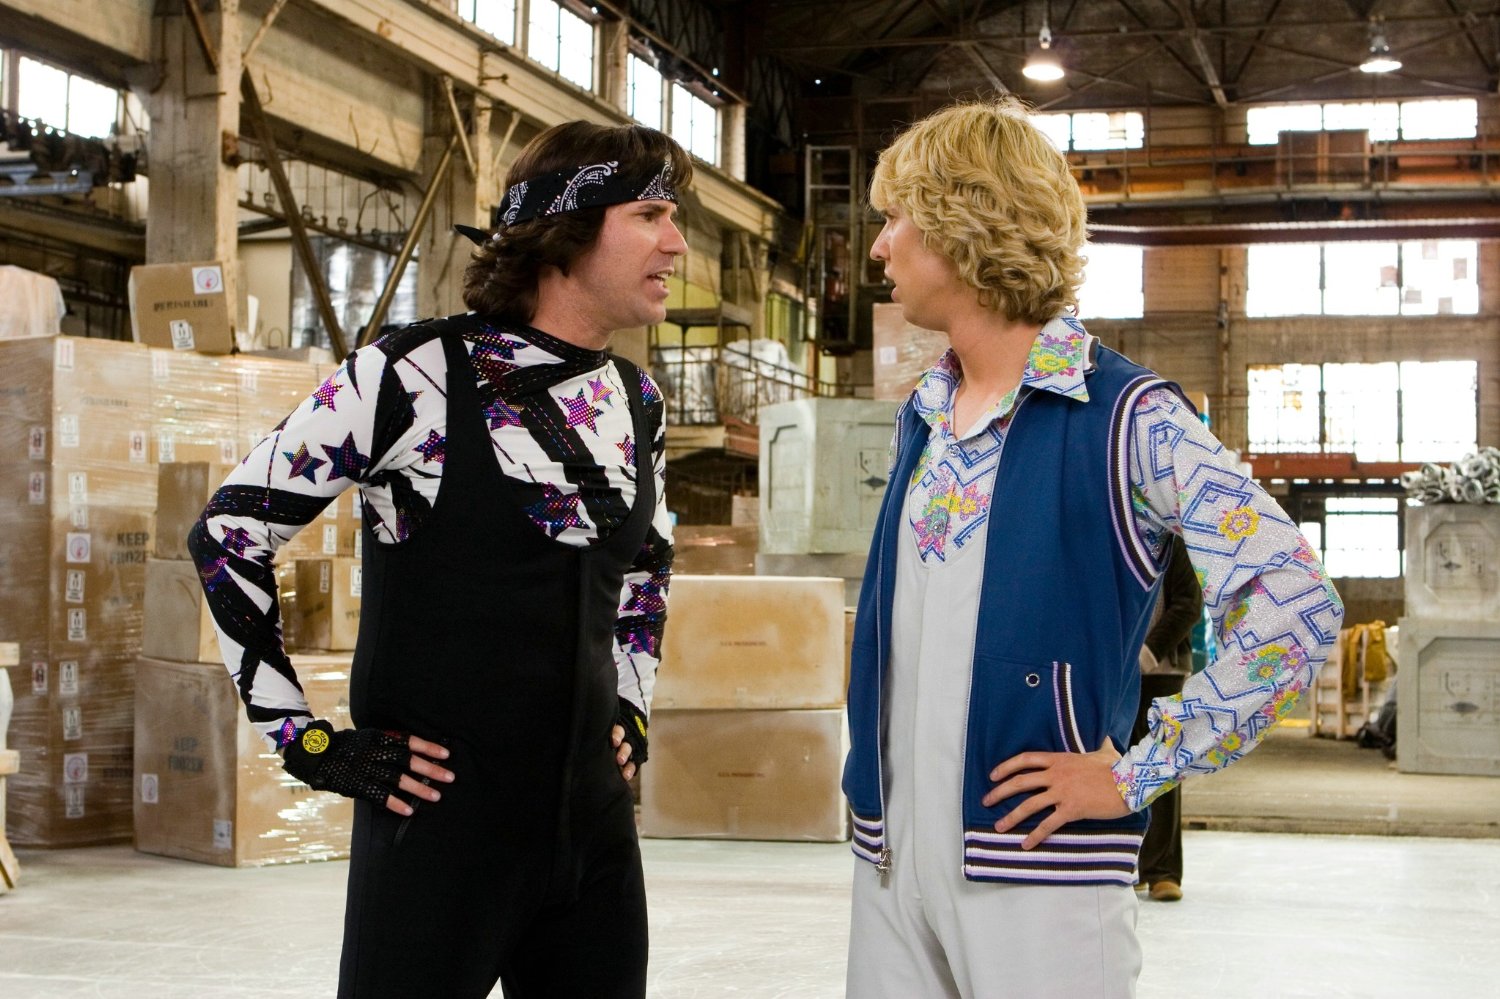 Blades of Glory 2007 Watch Online on 123Movies!